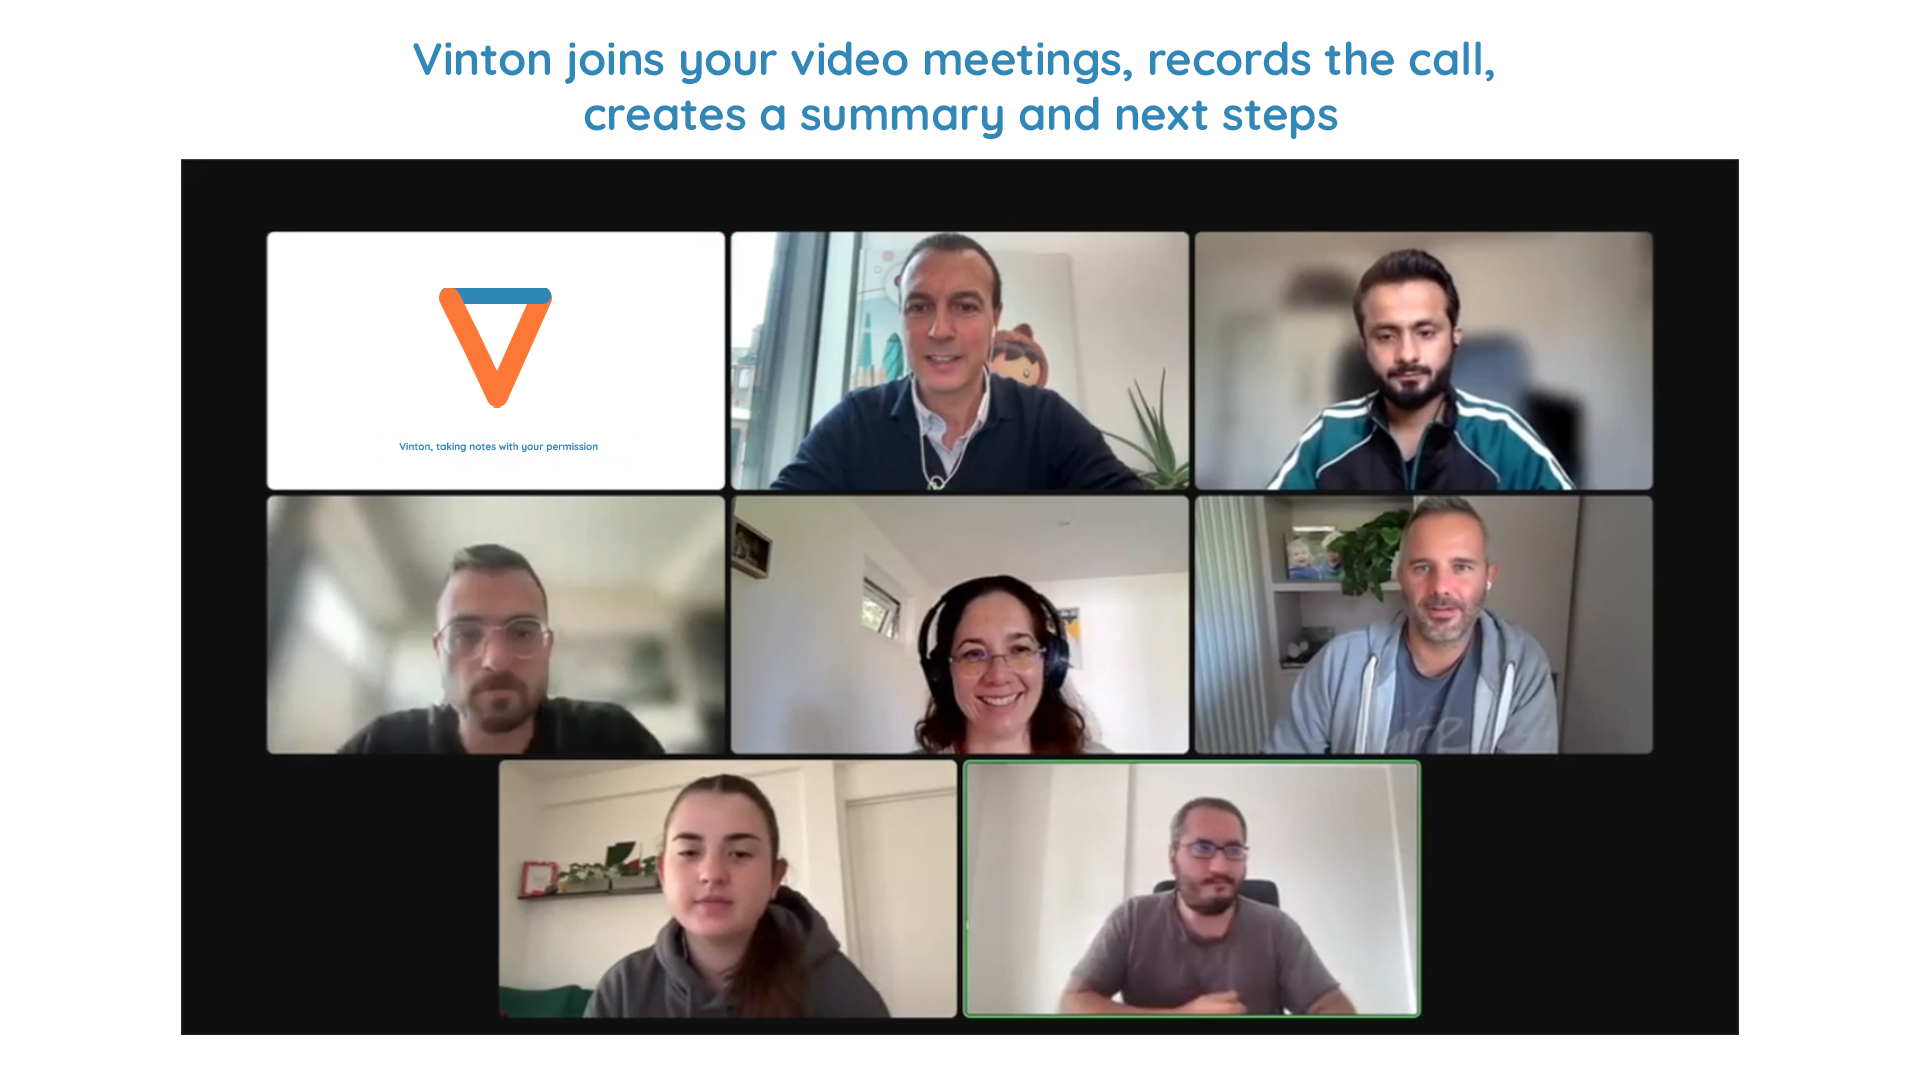 Vinton is a meeting assistant that joins your video calls to record, transcribe, summarize and suggest next step actions, all saved in your Salesforce Org. Vinton works with Teams, Google Meet and Zoom.
